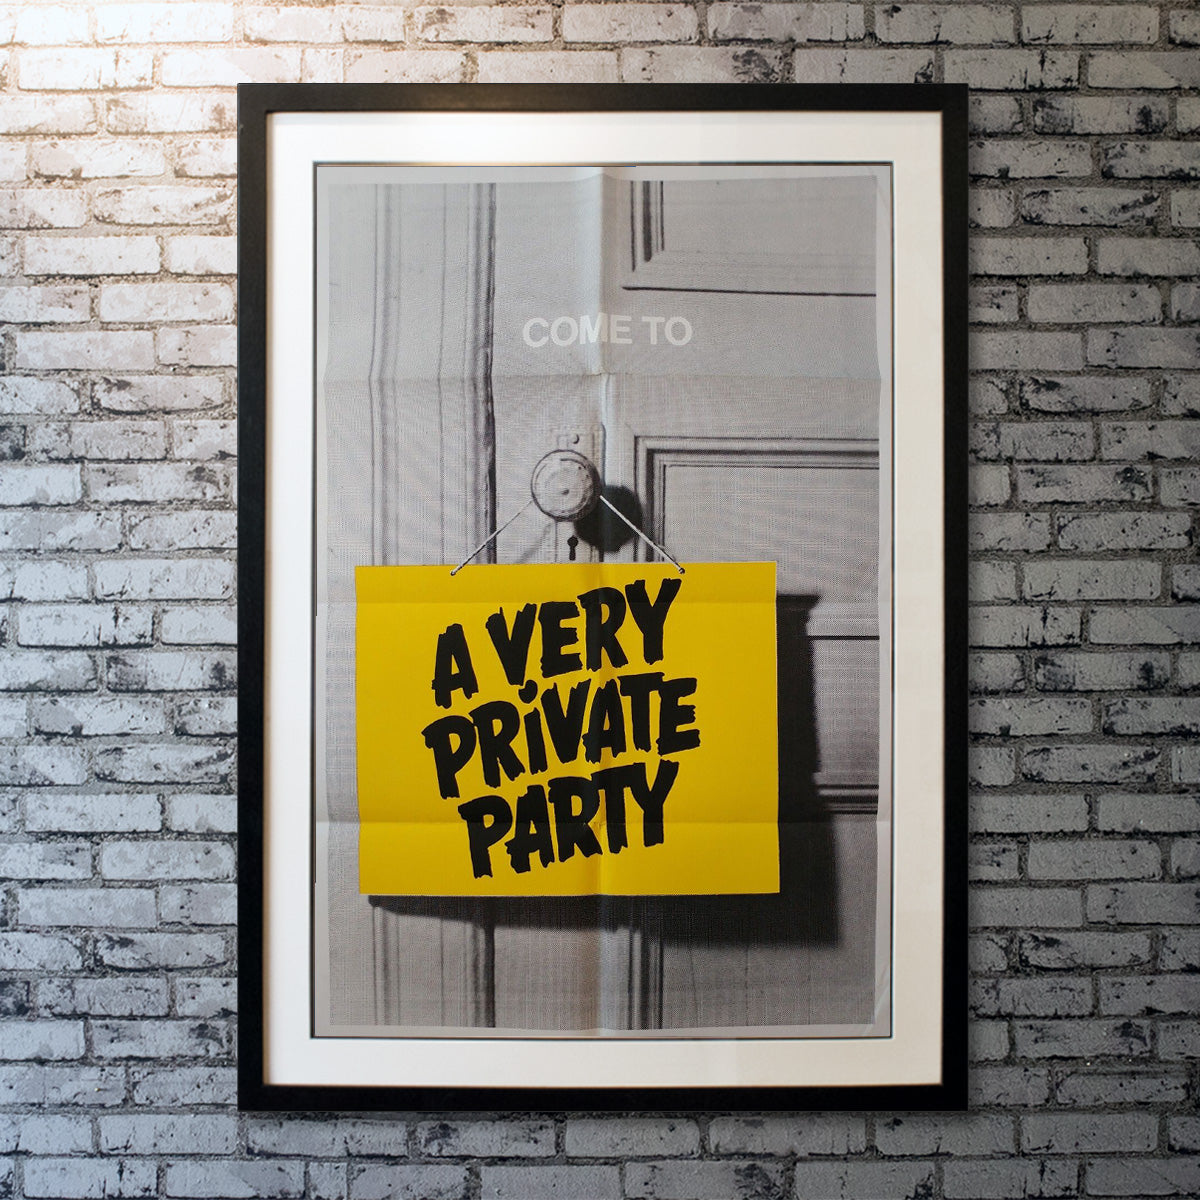 A Very Private Party (1974)